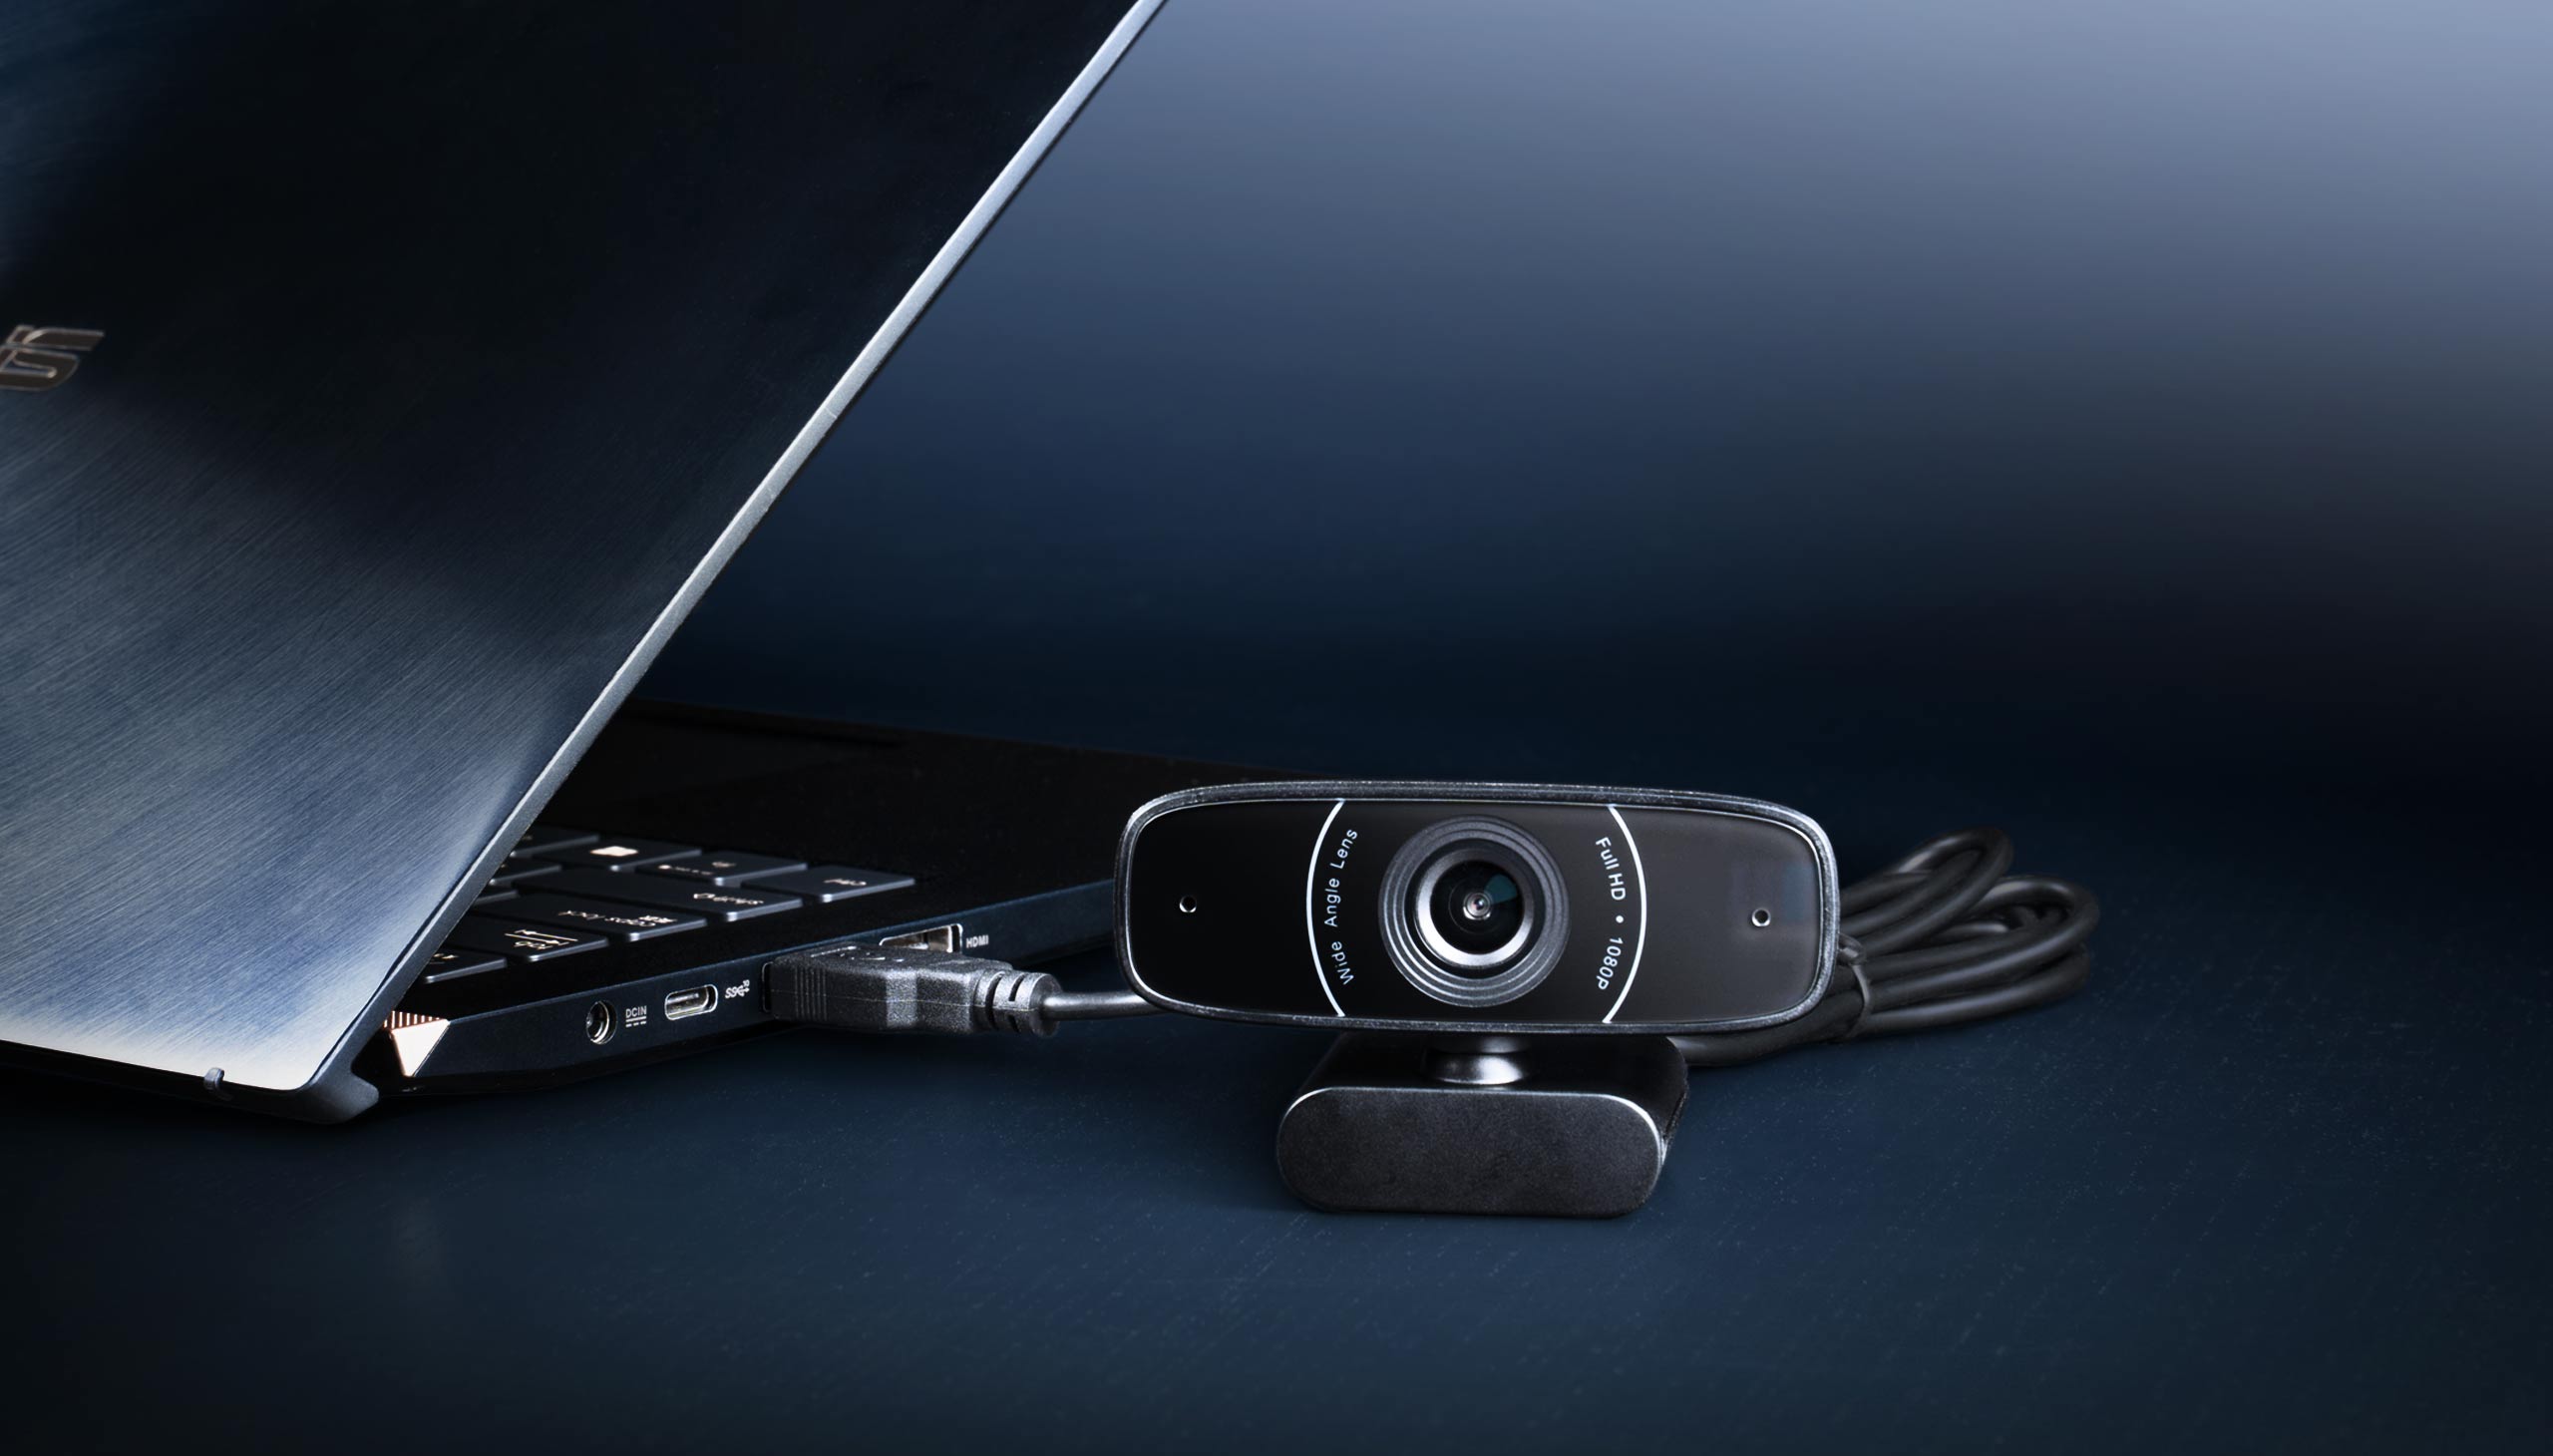 ASUS Webcam C3 is compatible with PC, Mac, and Chrome devices